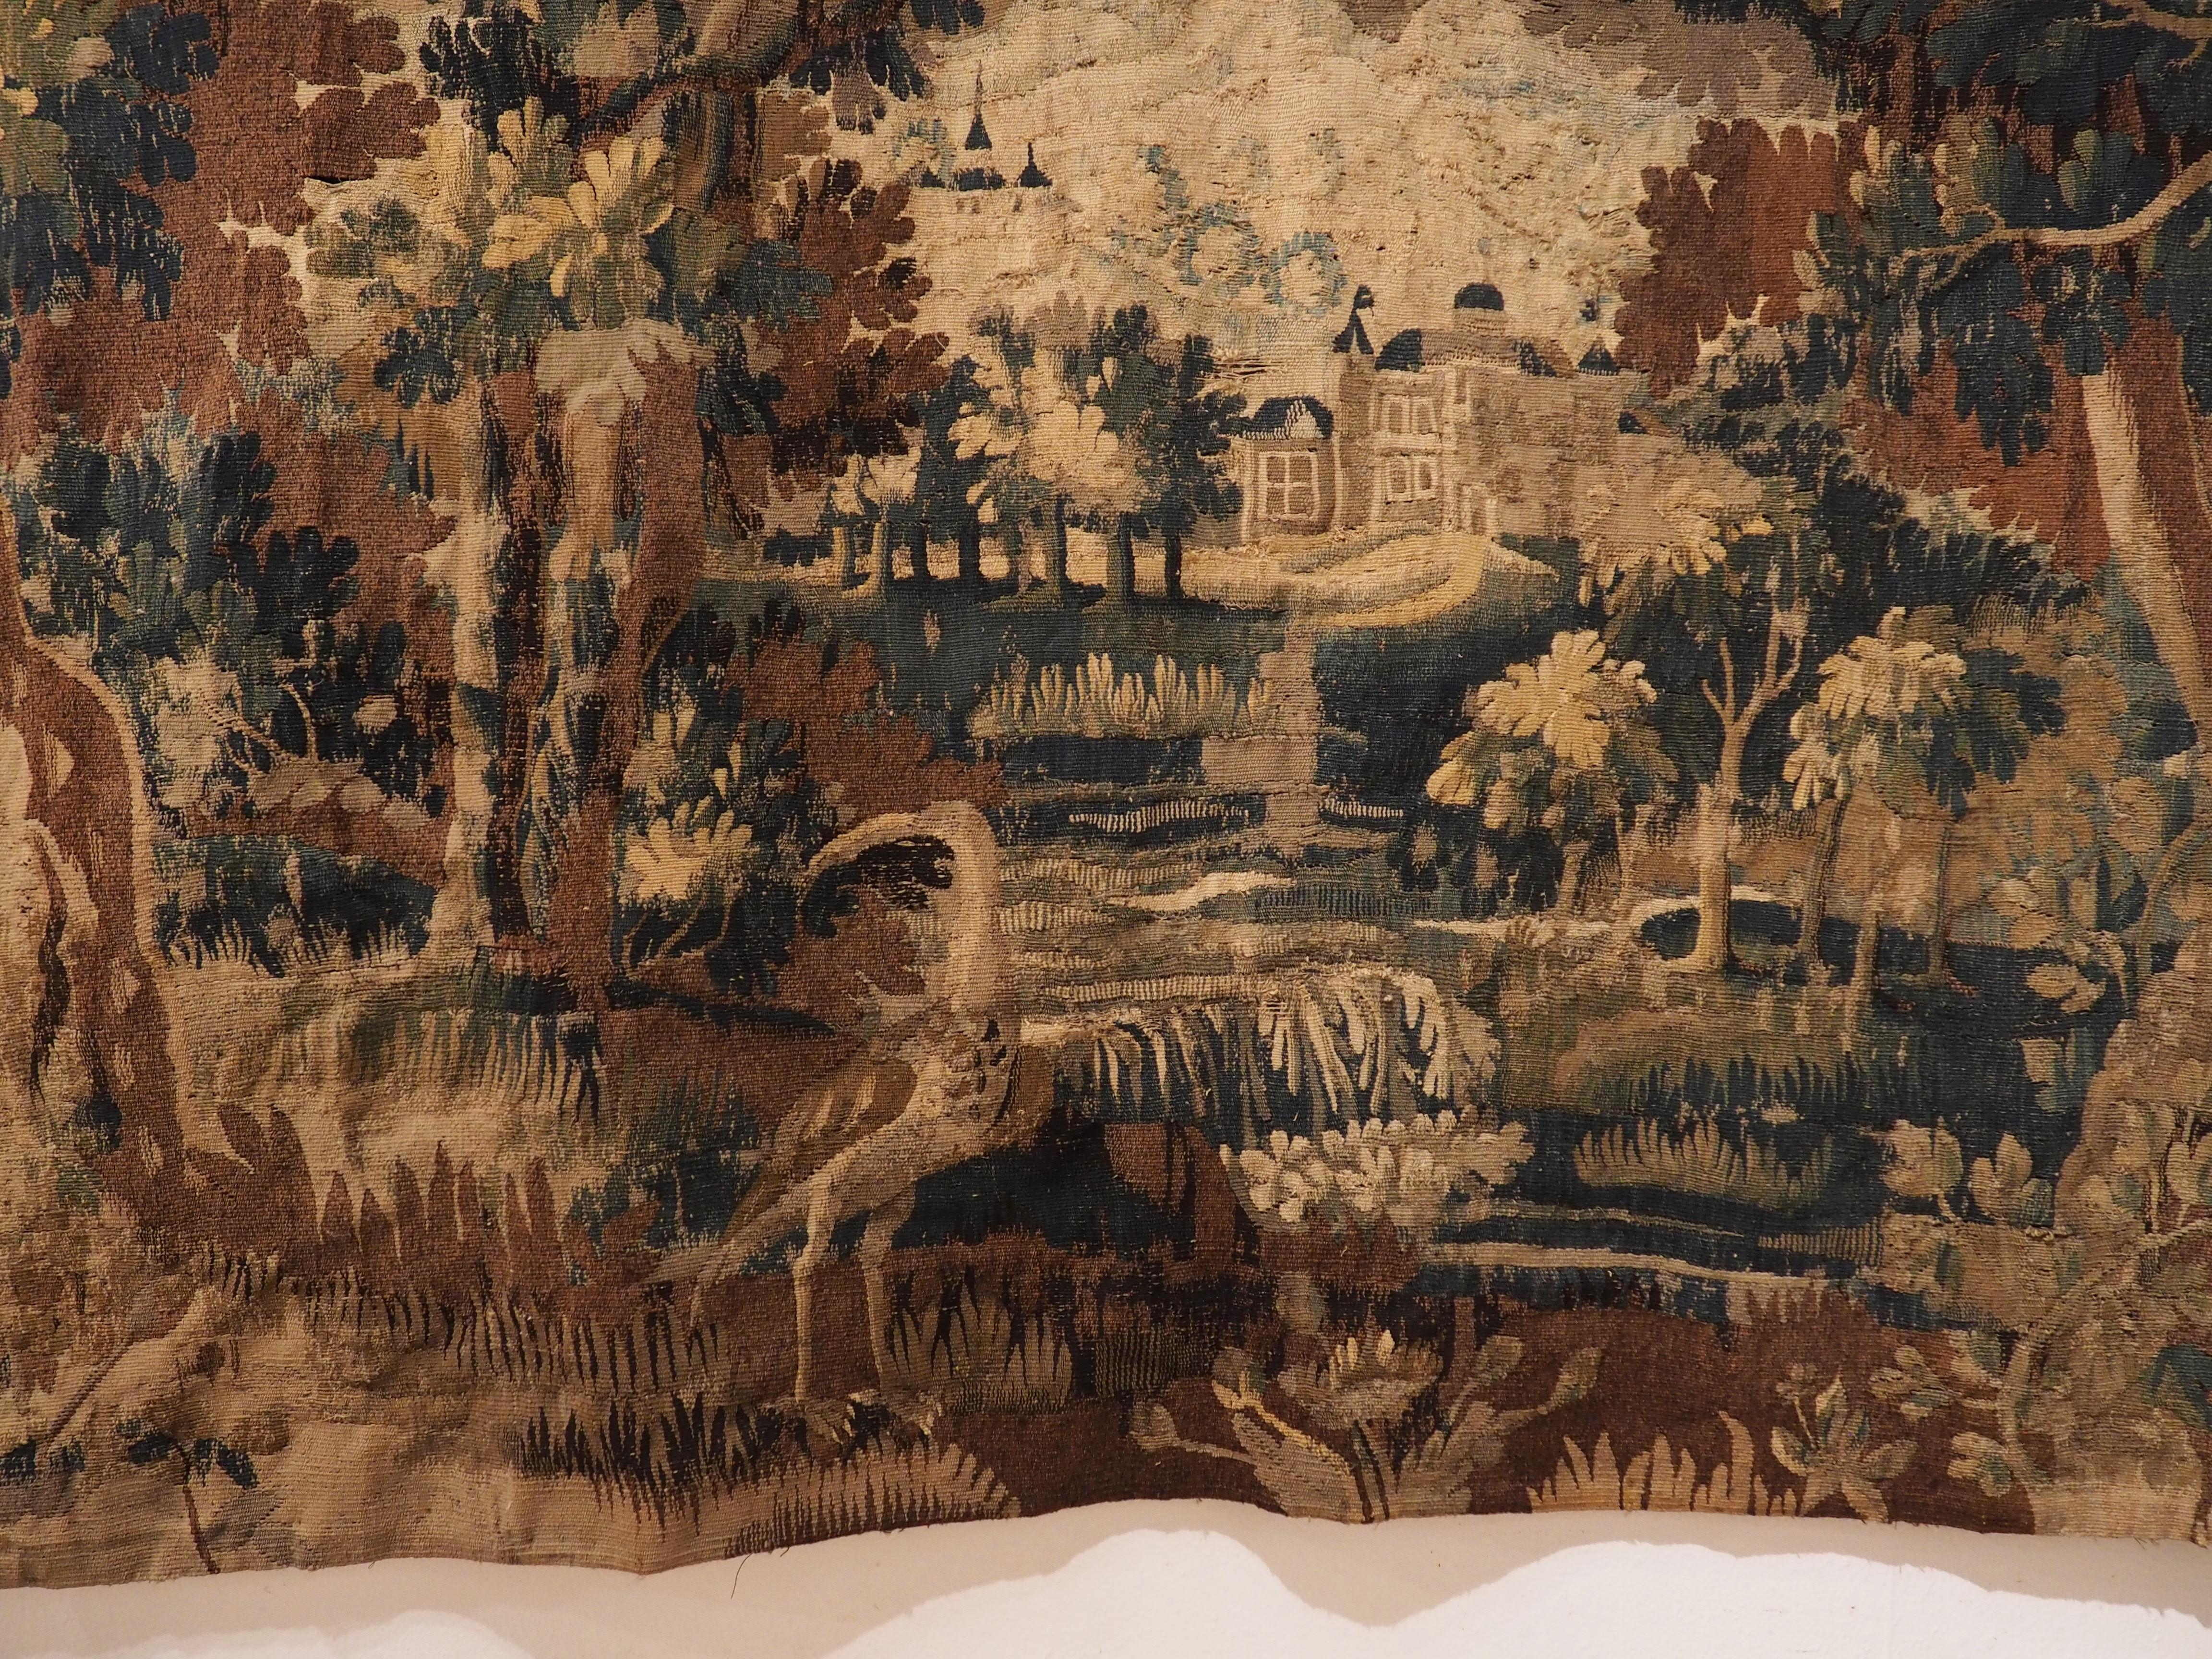 During the 18th century, tapestries manufactured at Aubusson were considered among the finest wall-hangings in France, along with creations from Gobelins and Beauvais. This verdure tapestry featuring a heavily wooded chateau scene was an earlier